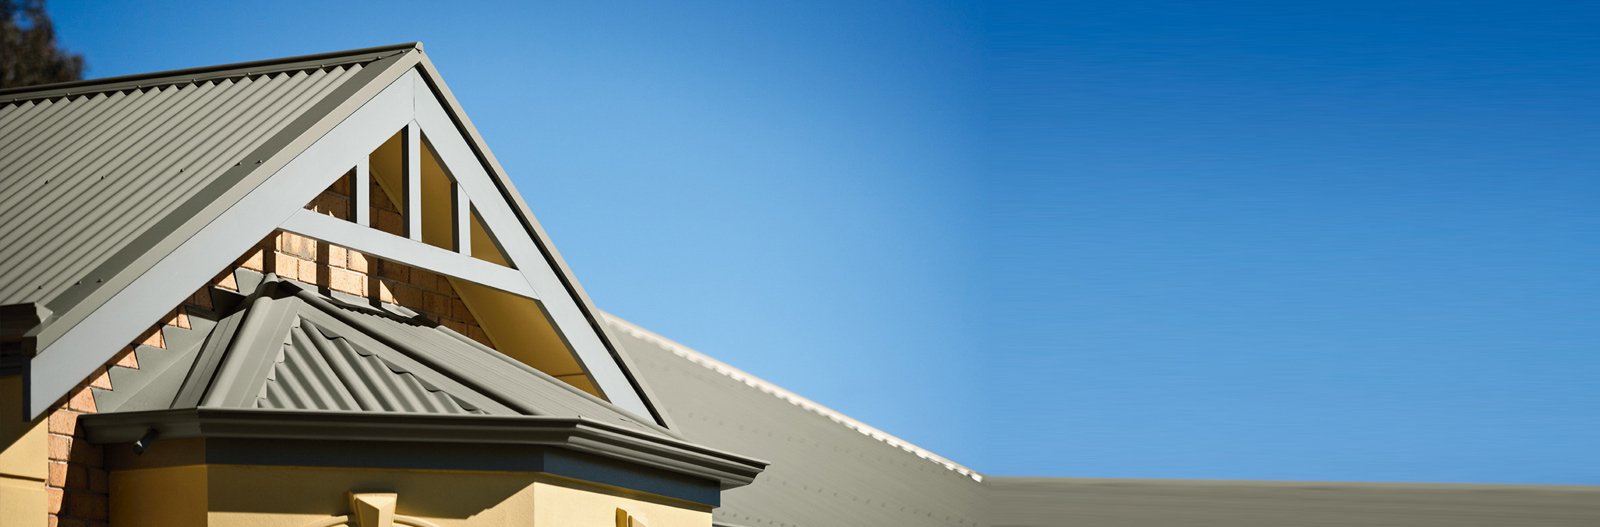 Townsville Roofing